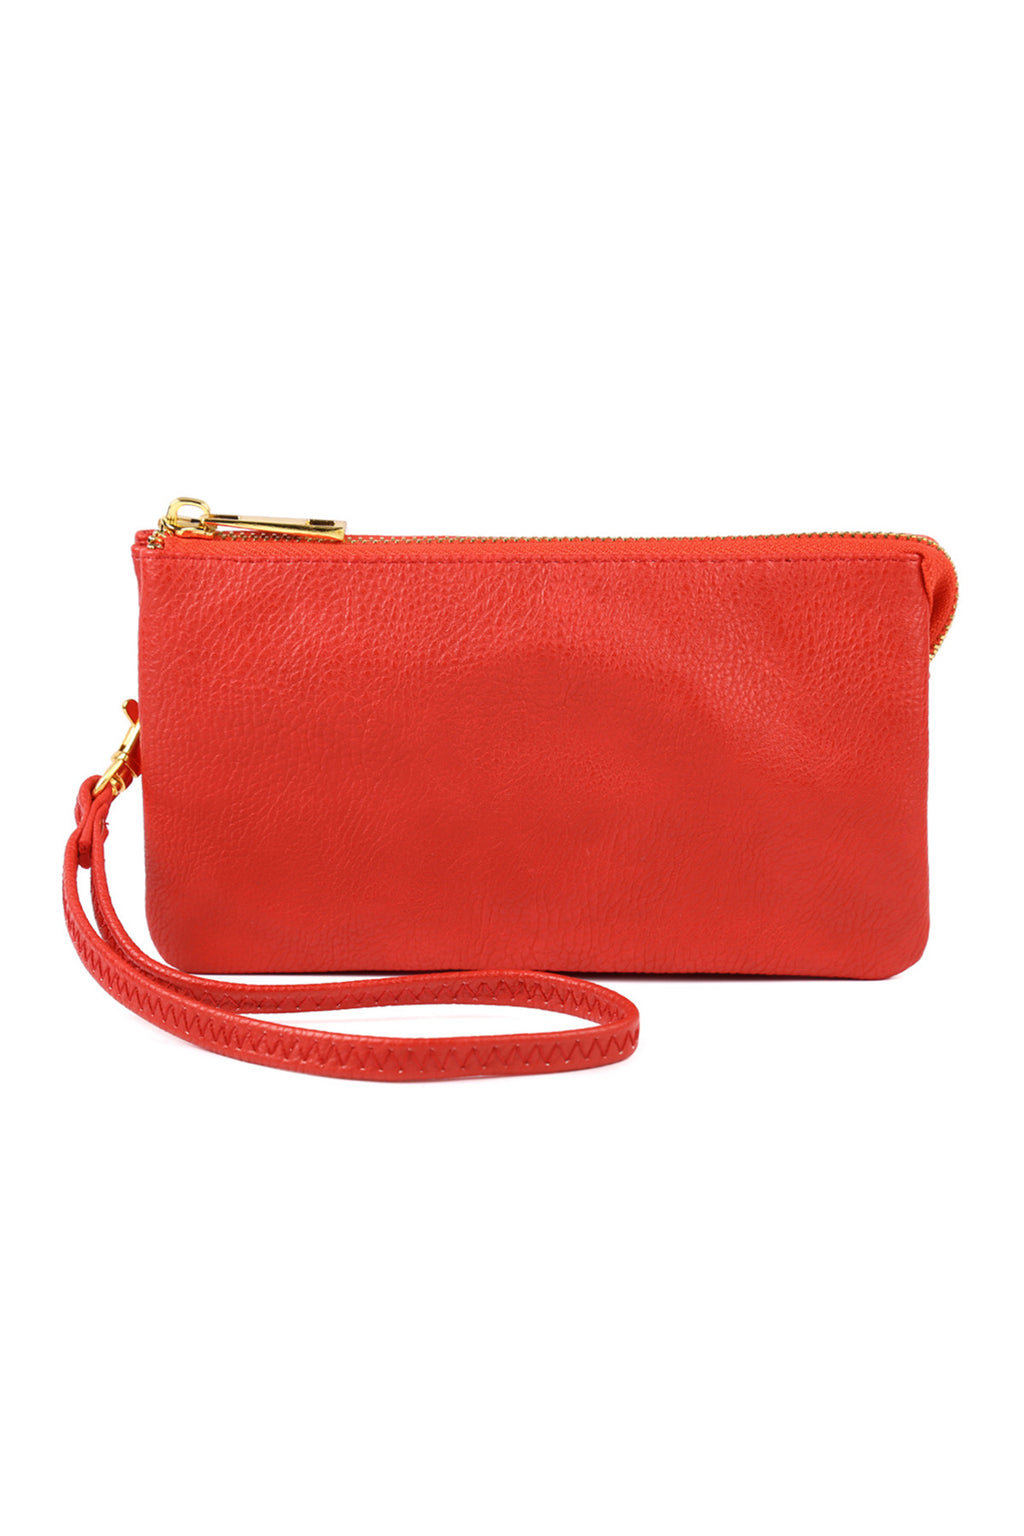 Leather Wallet with Detachable Wristlet Red - Pack of 6